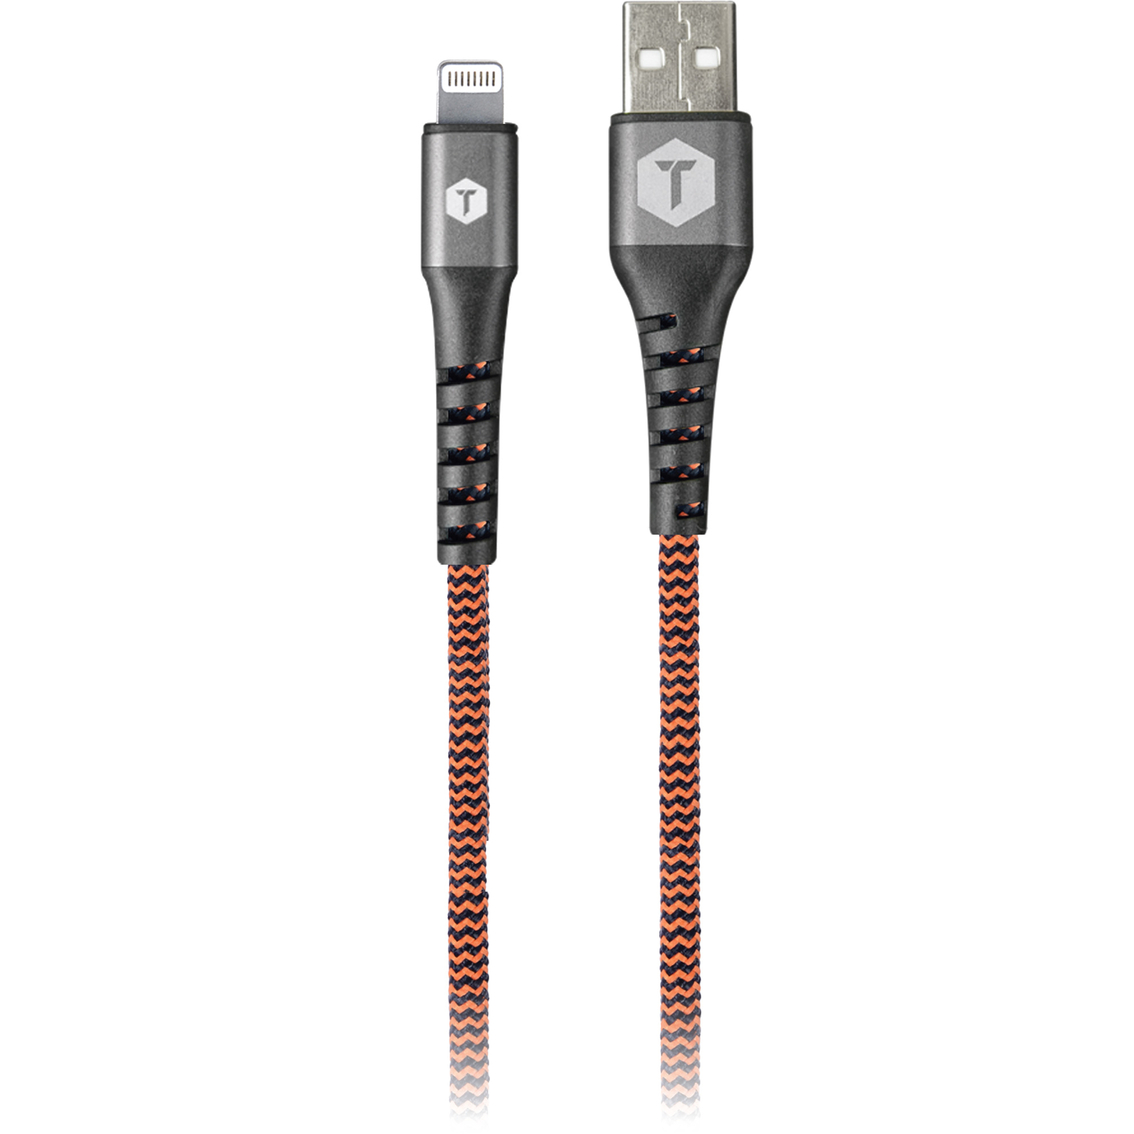 ToughTested Lightning to USB Braided 6 ft. Cable - Image 2 of 2